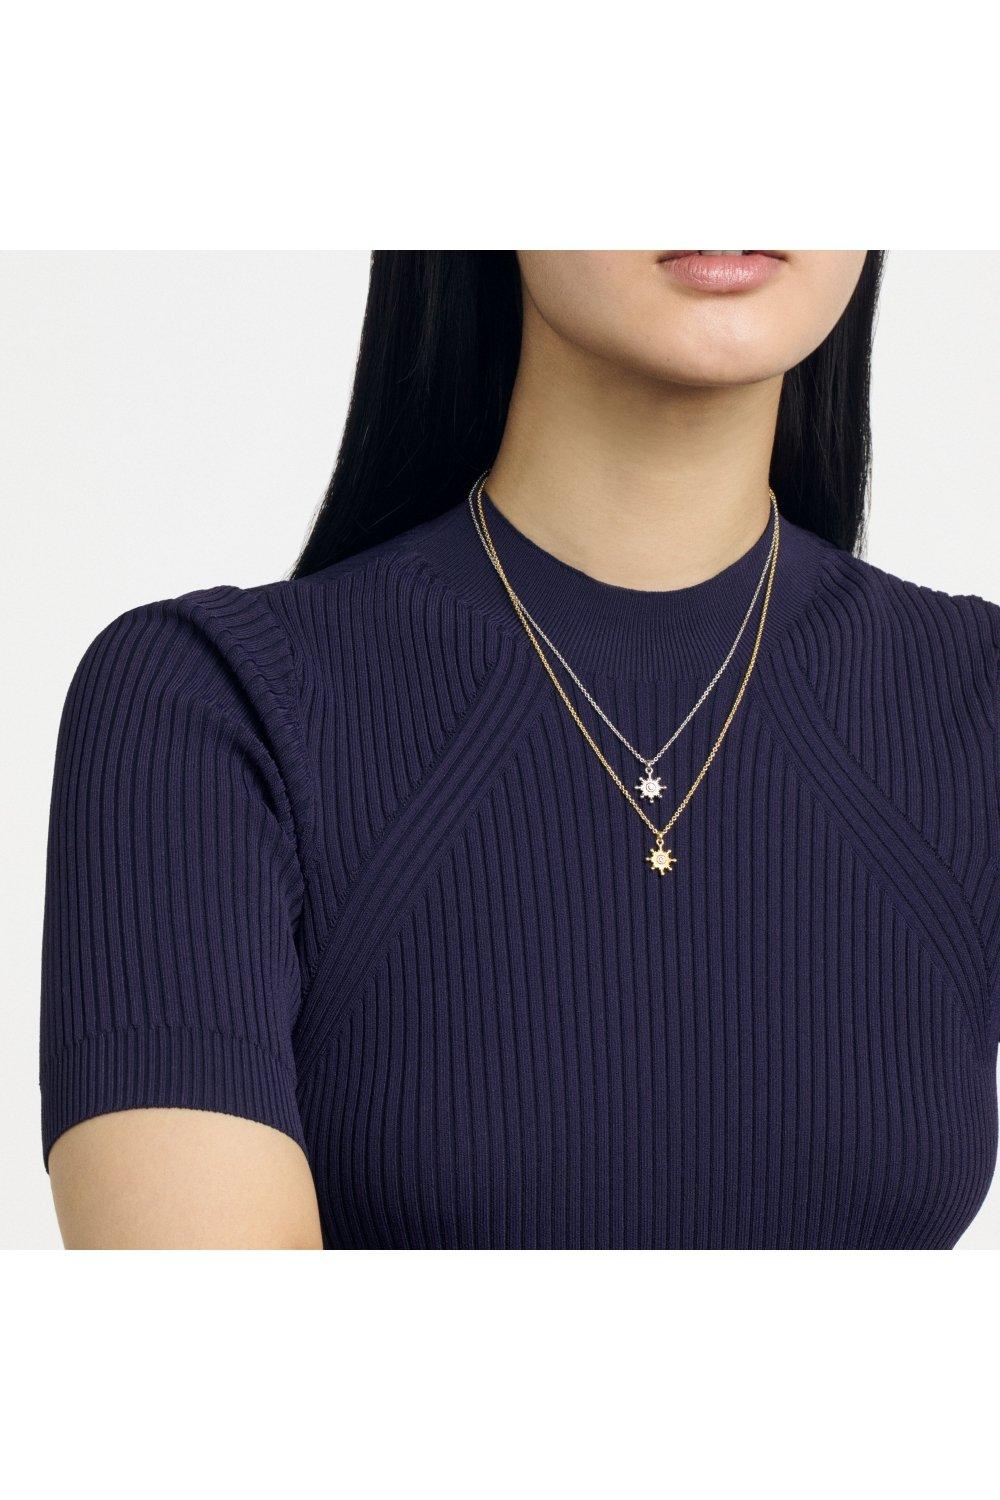 Ted Baker Saigi star pendant necklace in silver and crystal | ASOS